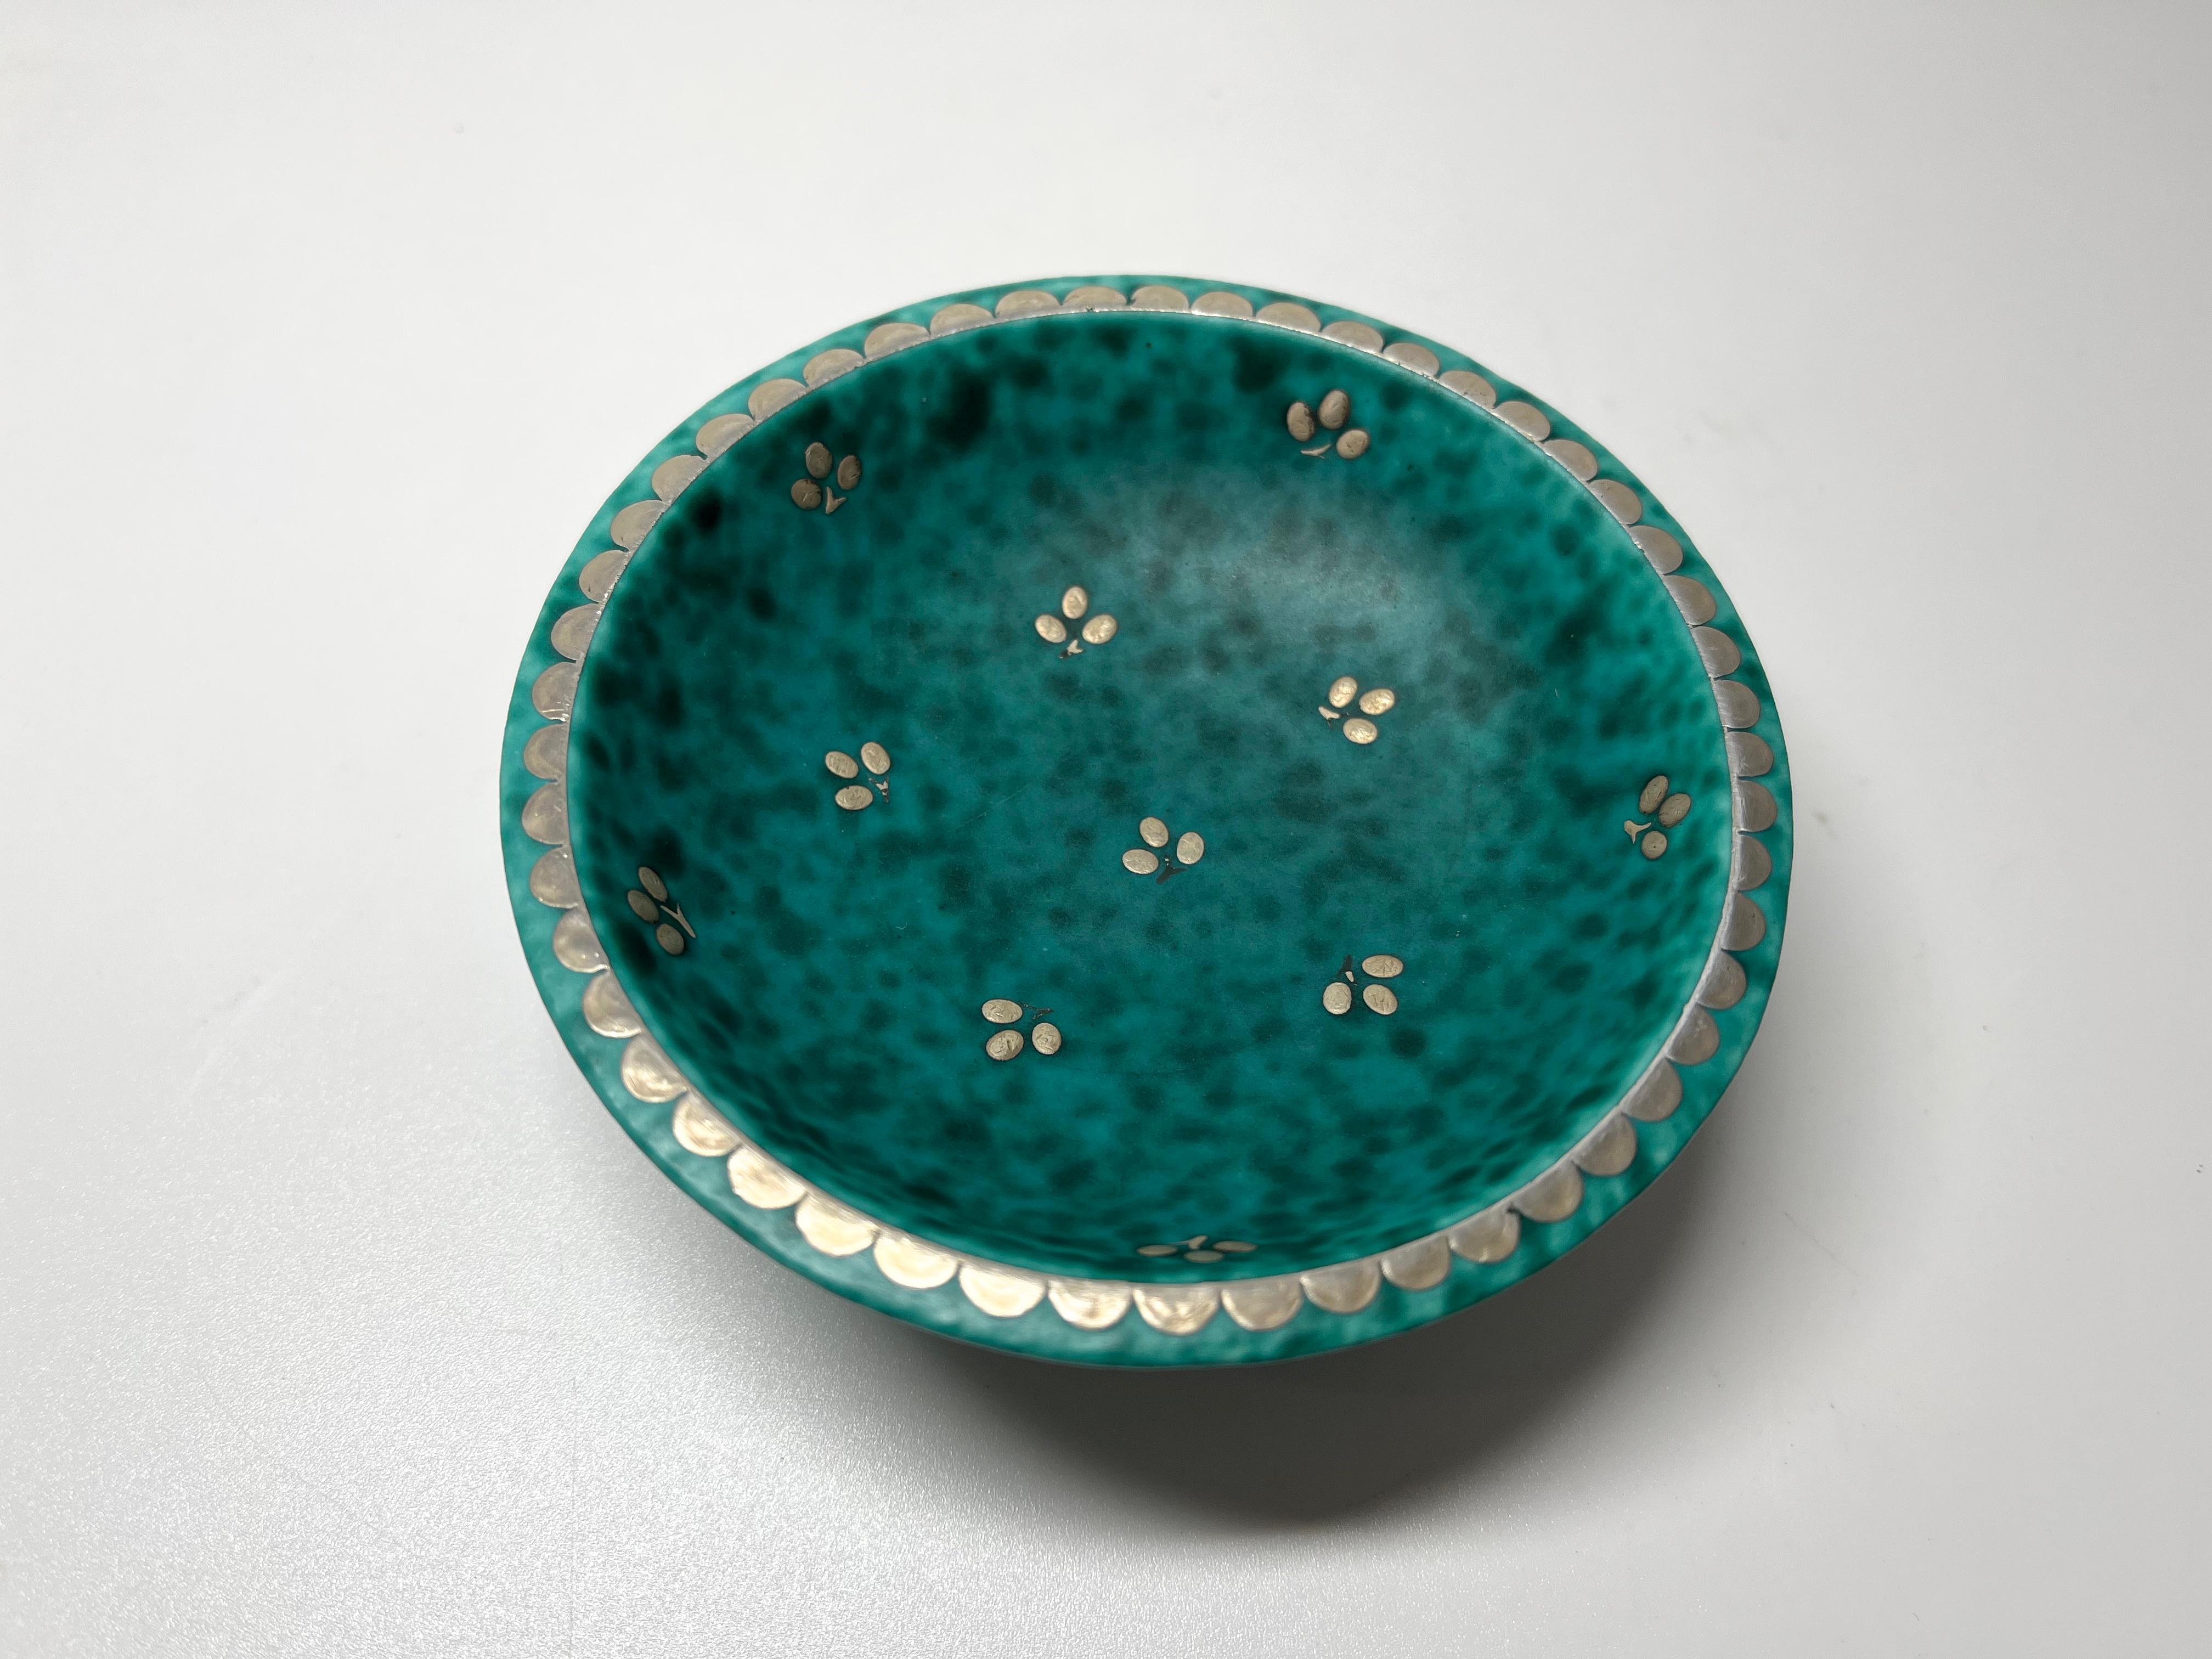 Small footed stoneware Argenta dish by Wilhelm Kage for Gustavsberg, Sweden. Decorated with trefoil flower sprigs and banding to rim and foot in applied silver
A lovely 'introduction to Argenta' piece
Circa 1960's
Stamped Gustavsberg Argenta on